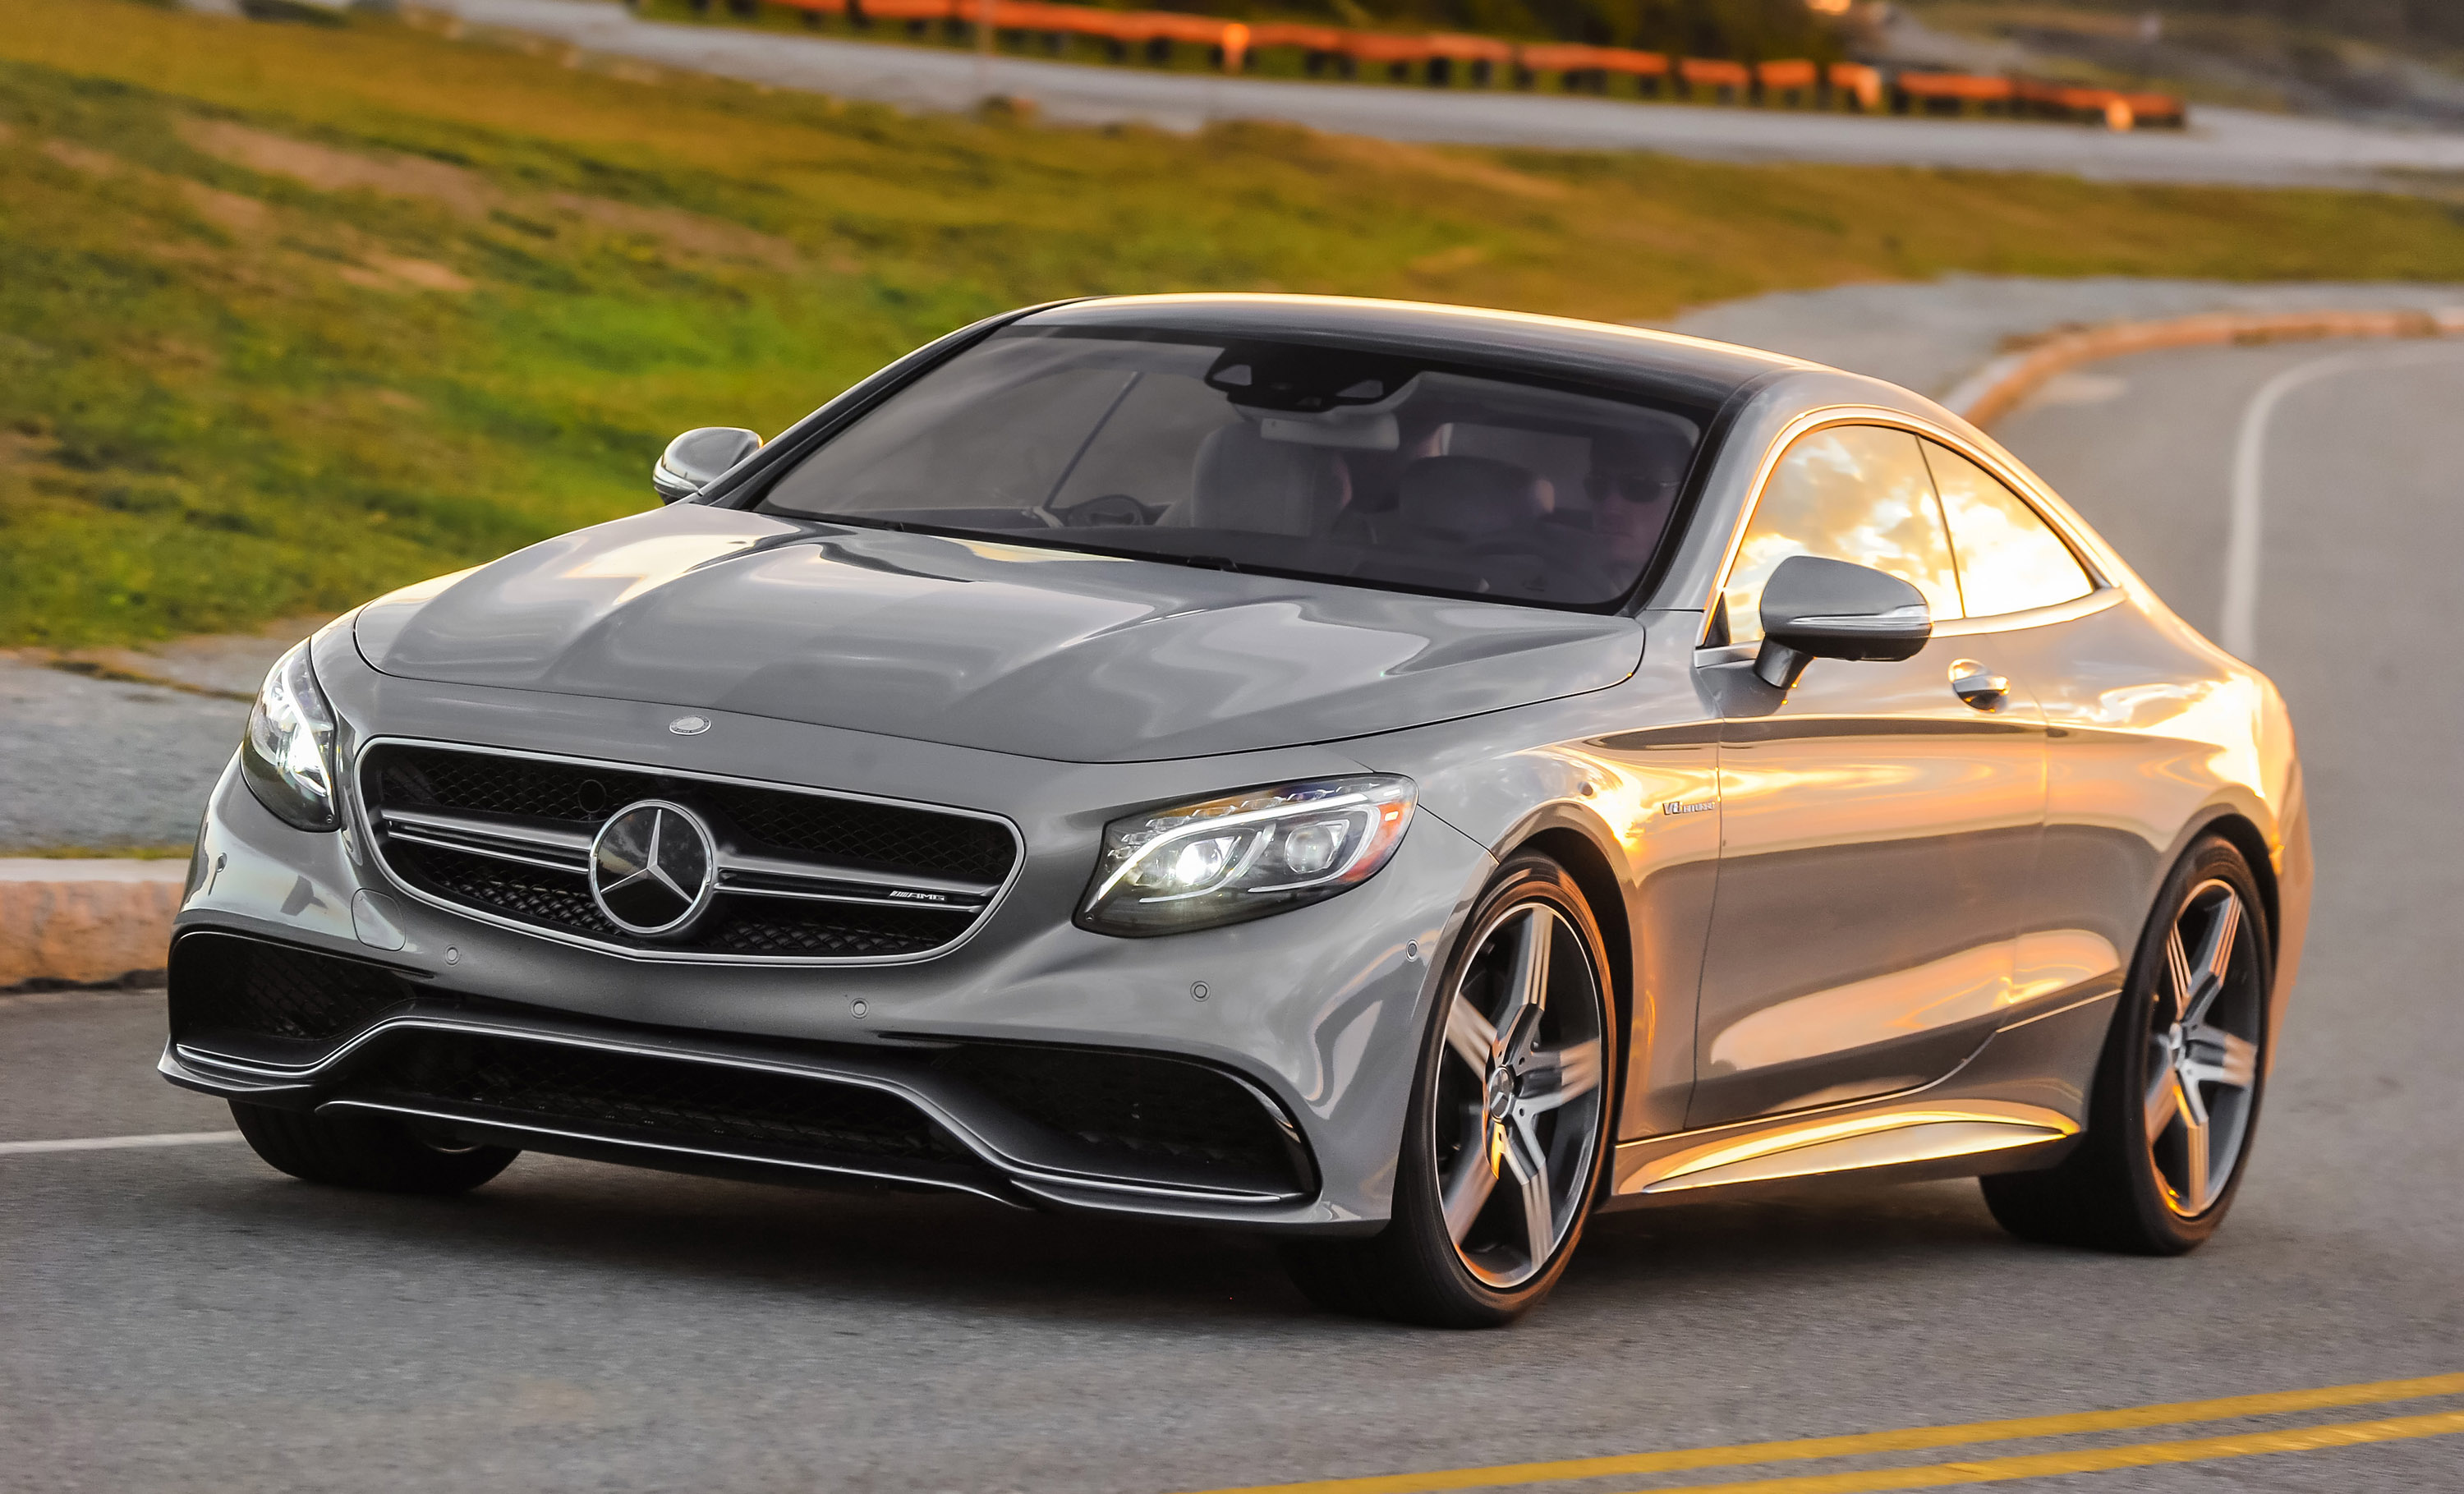 Mercedes-Benz S63 AMG Coupe 4MATIC photo #1